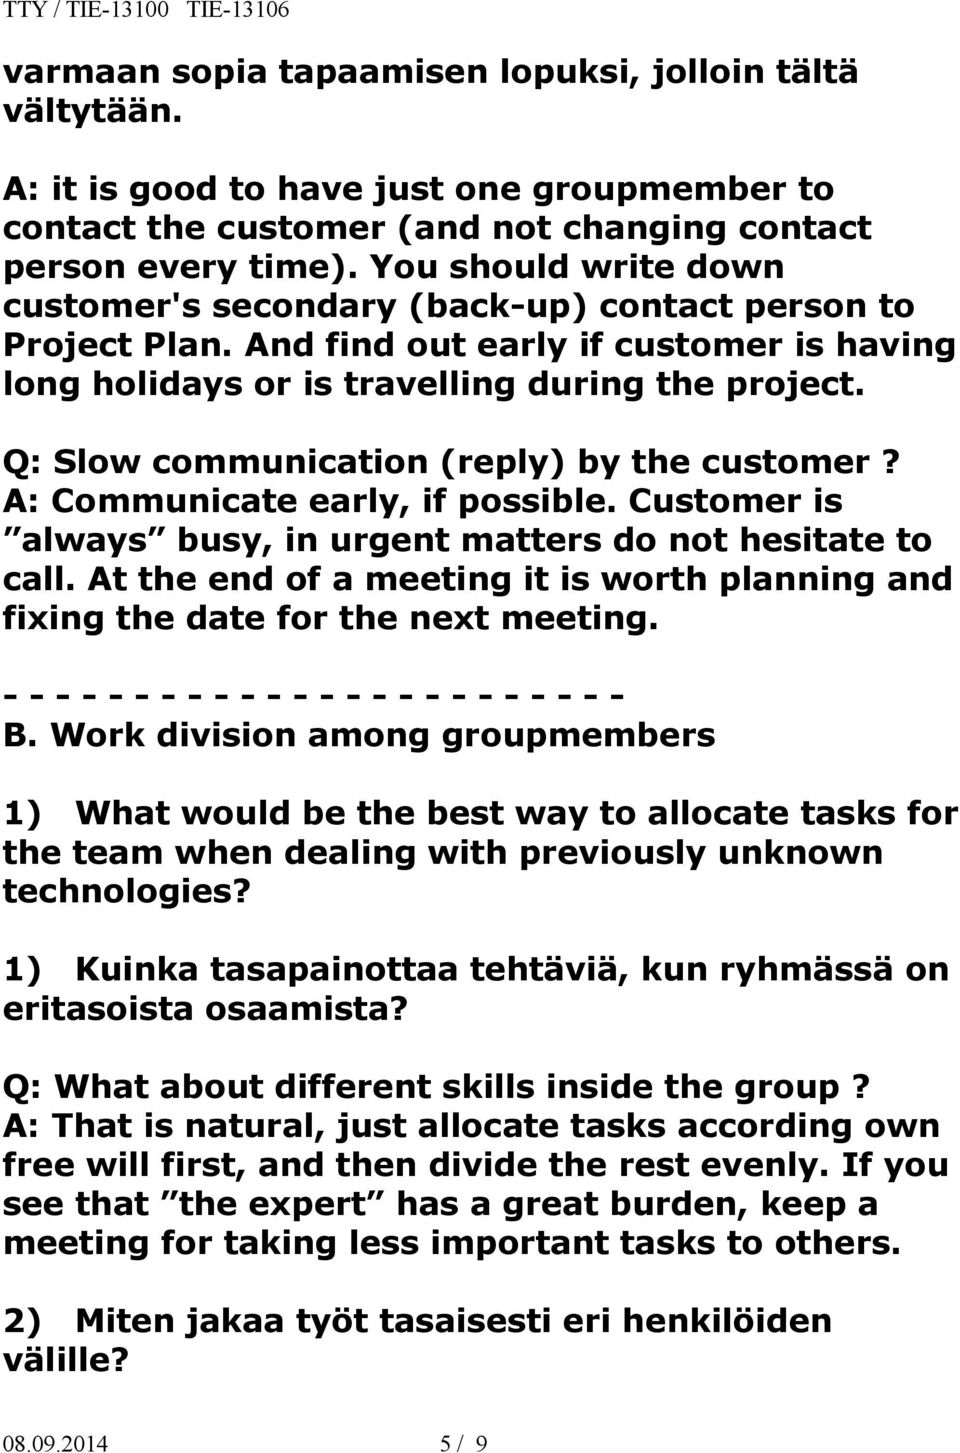 Q: Slow communication (reply) by the customer? A: Communicate early, if possible. Customer is always busy, in urgent matters do not hesitate to call.